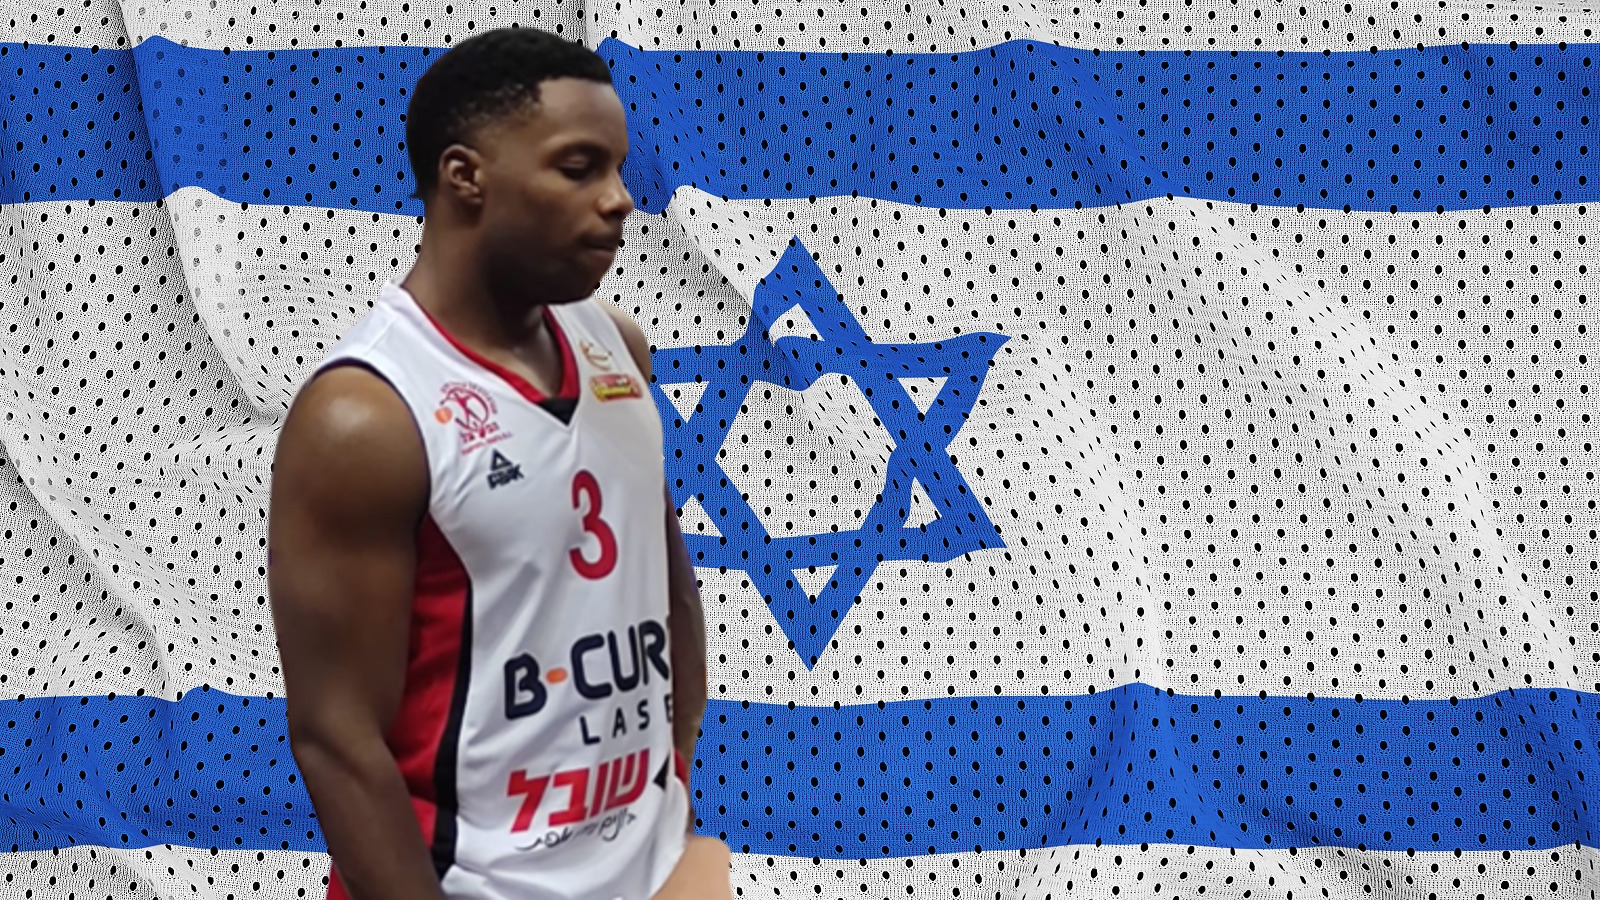 Jewish, African American Basketball Player Denied Right to Immigrate to Israel